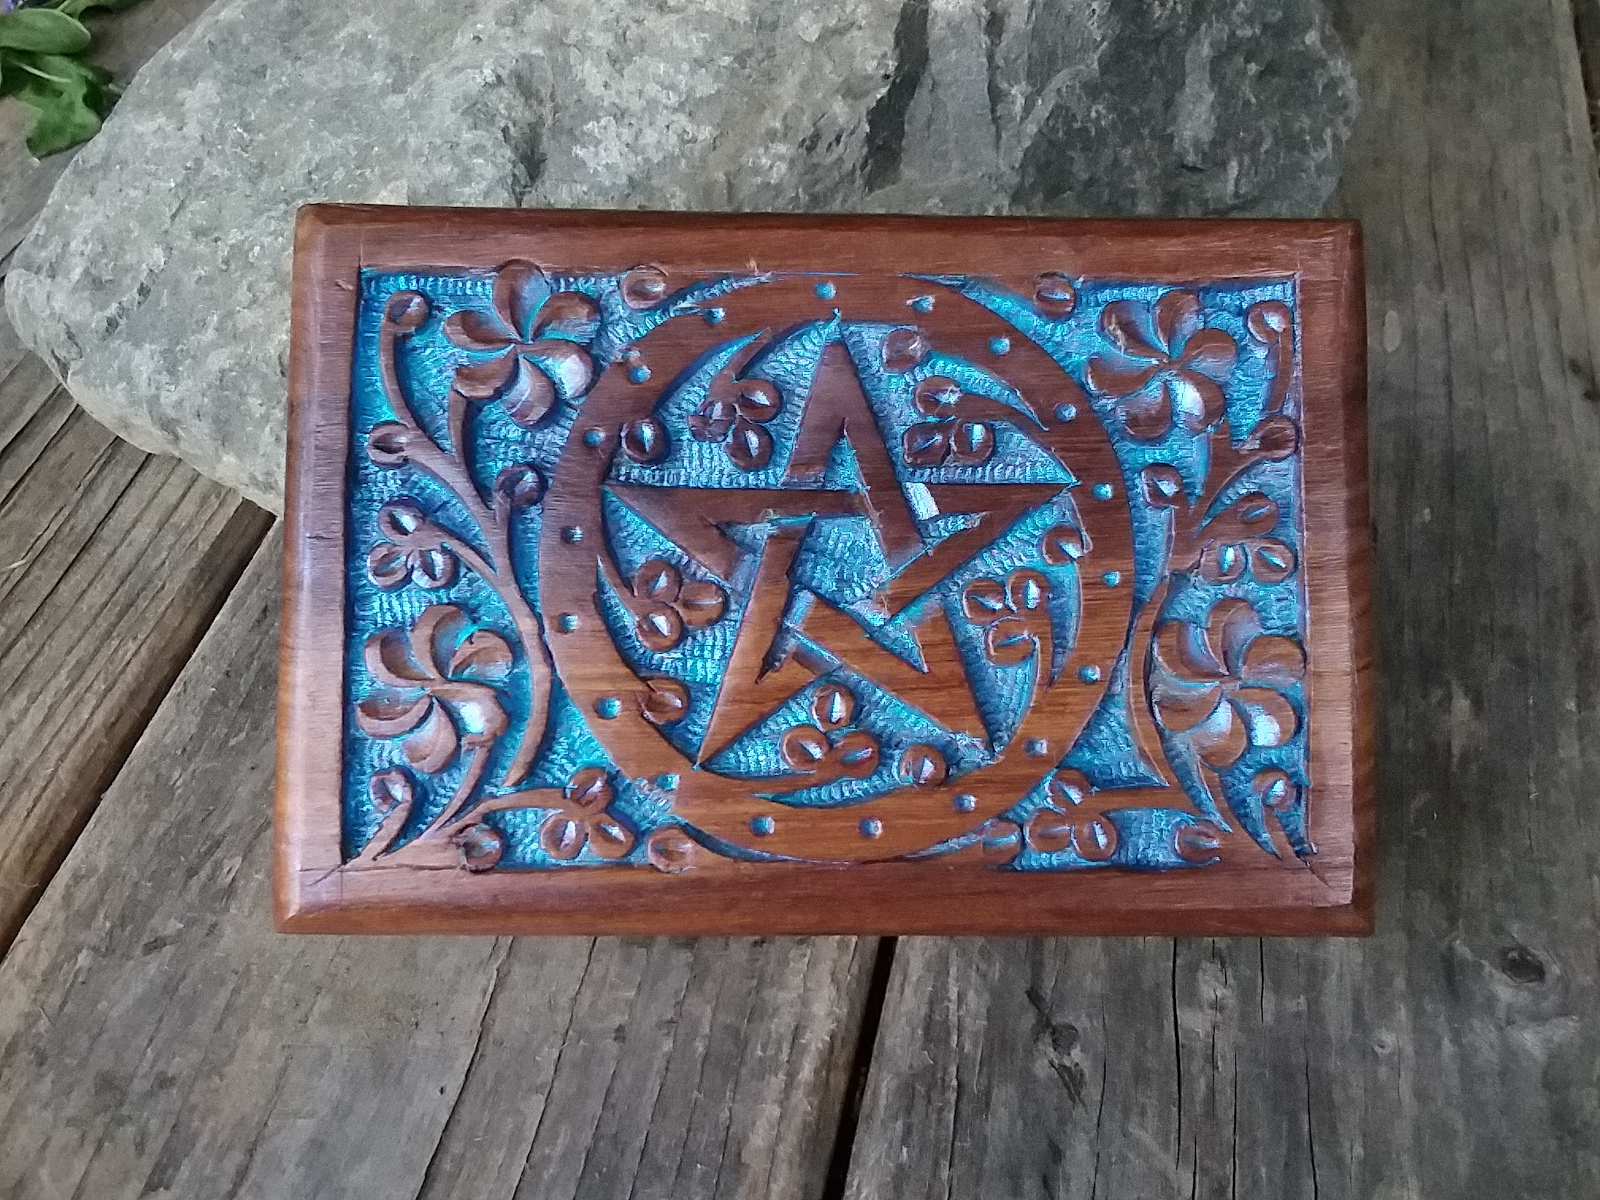 Pentacle floral carved wood box 4x6 Blue finish - Click Image to Close